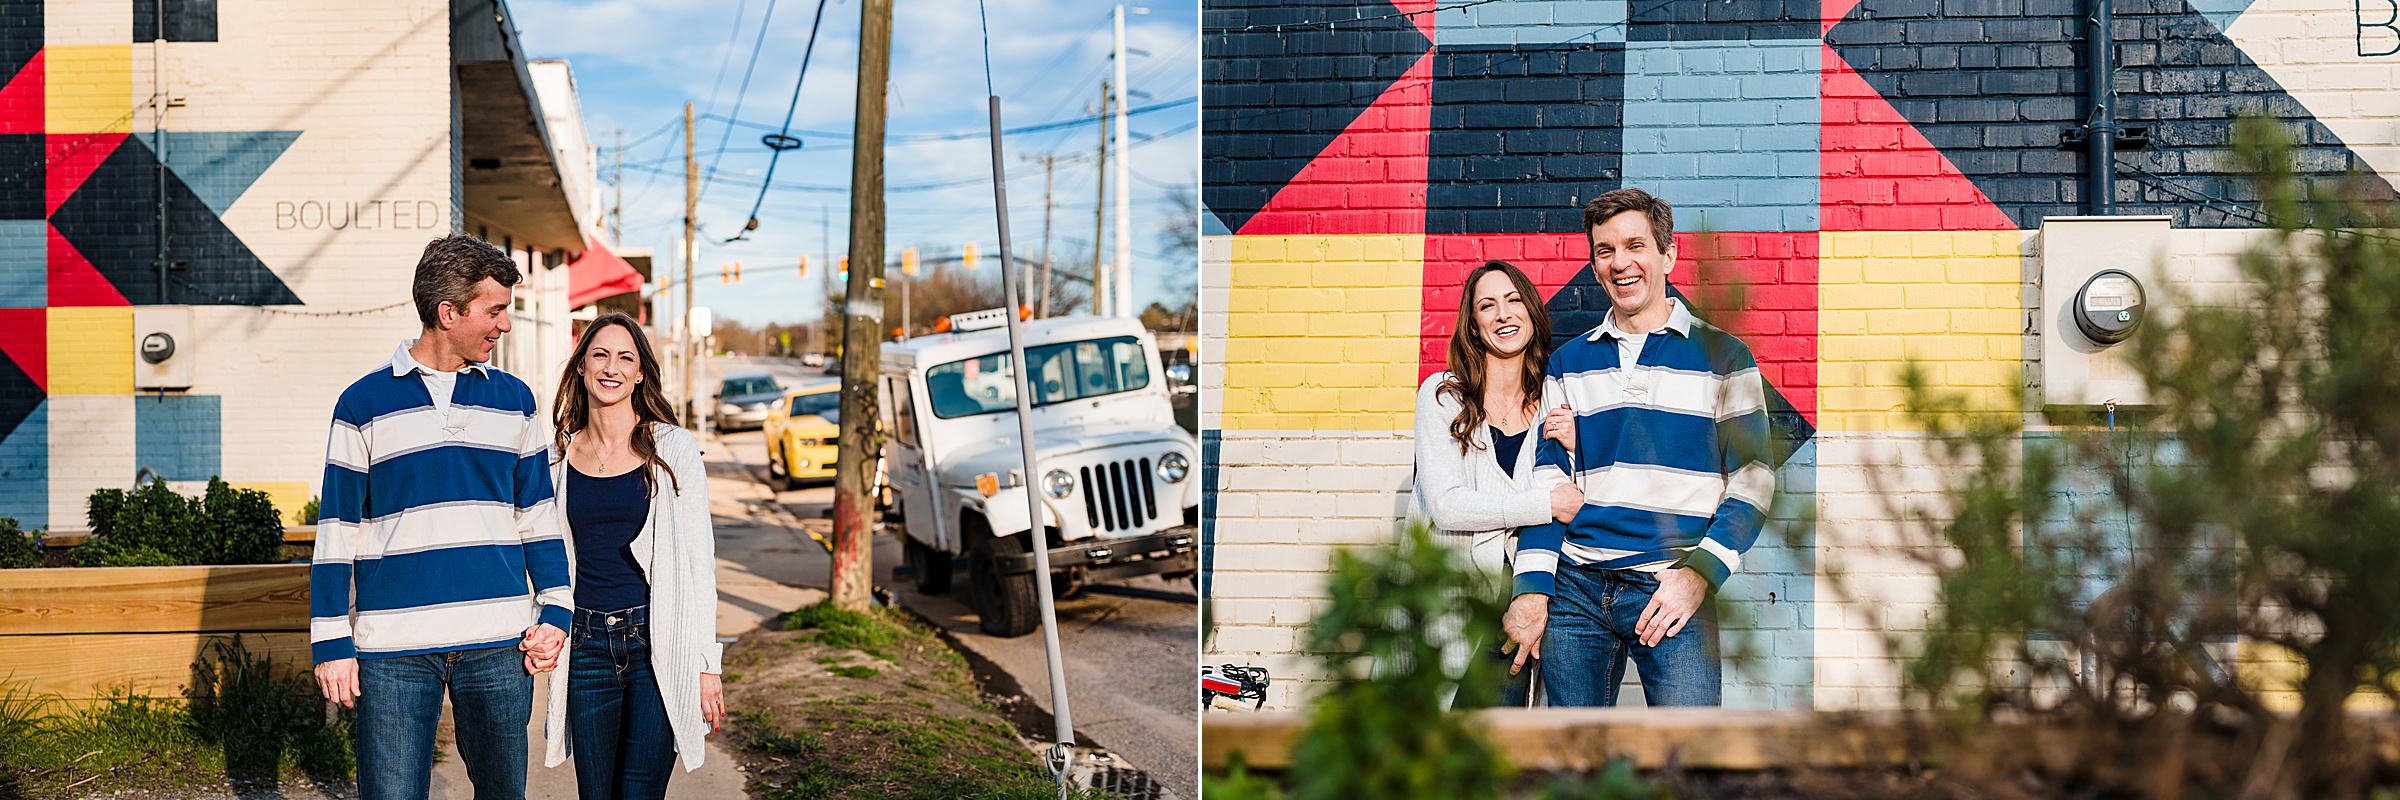 Colorful Raleigh Engagement Photos, Boulted Bread